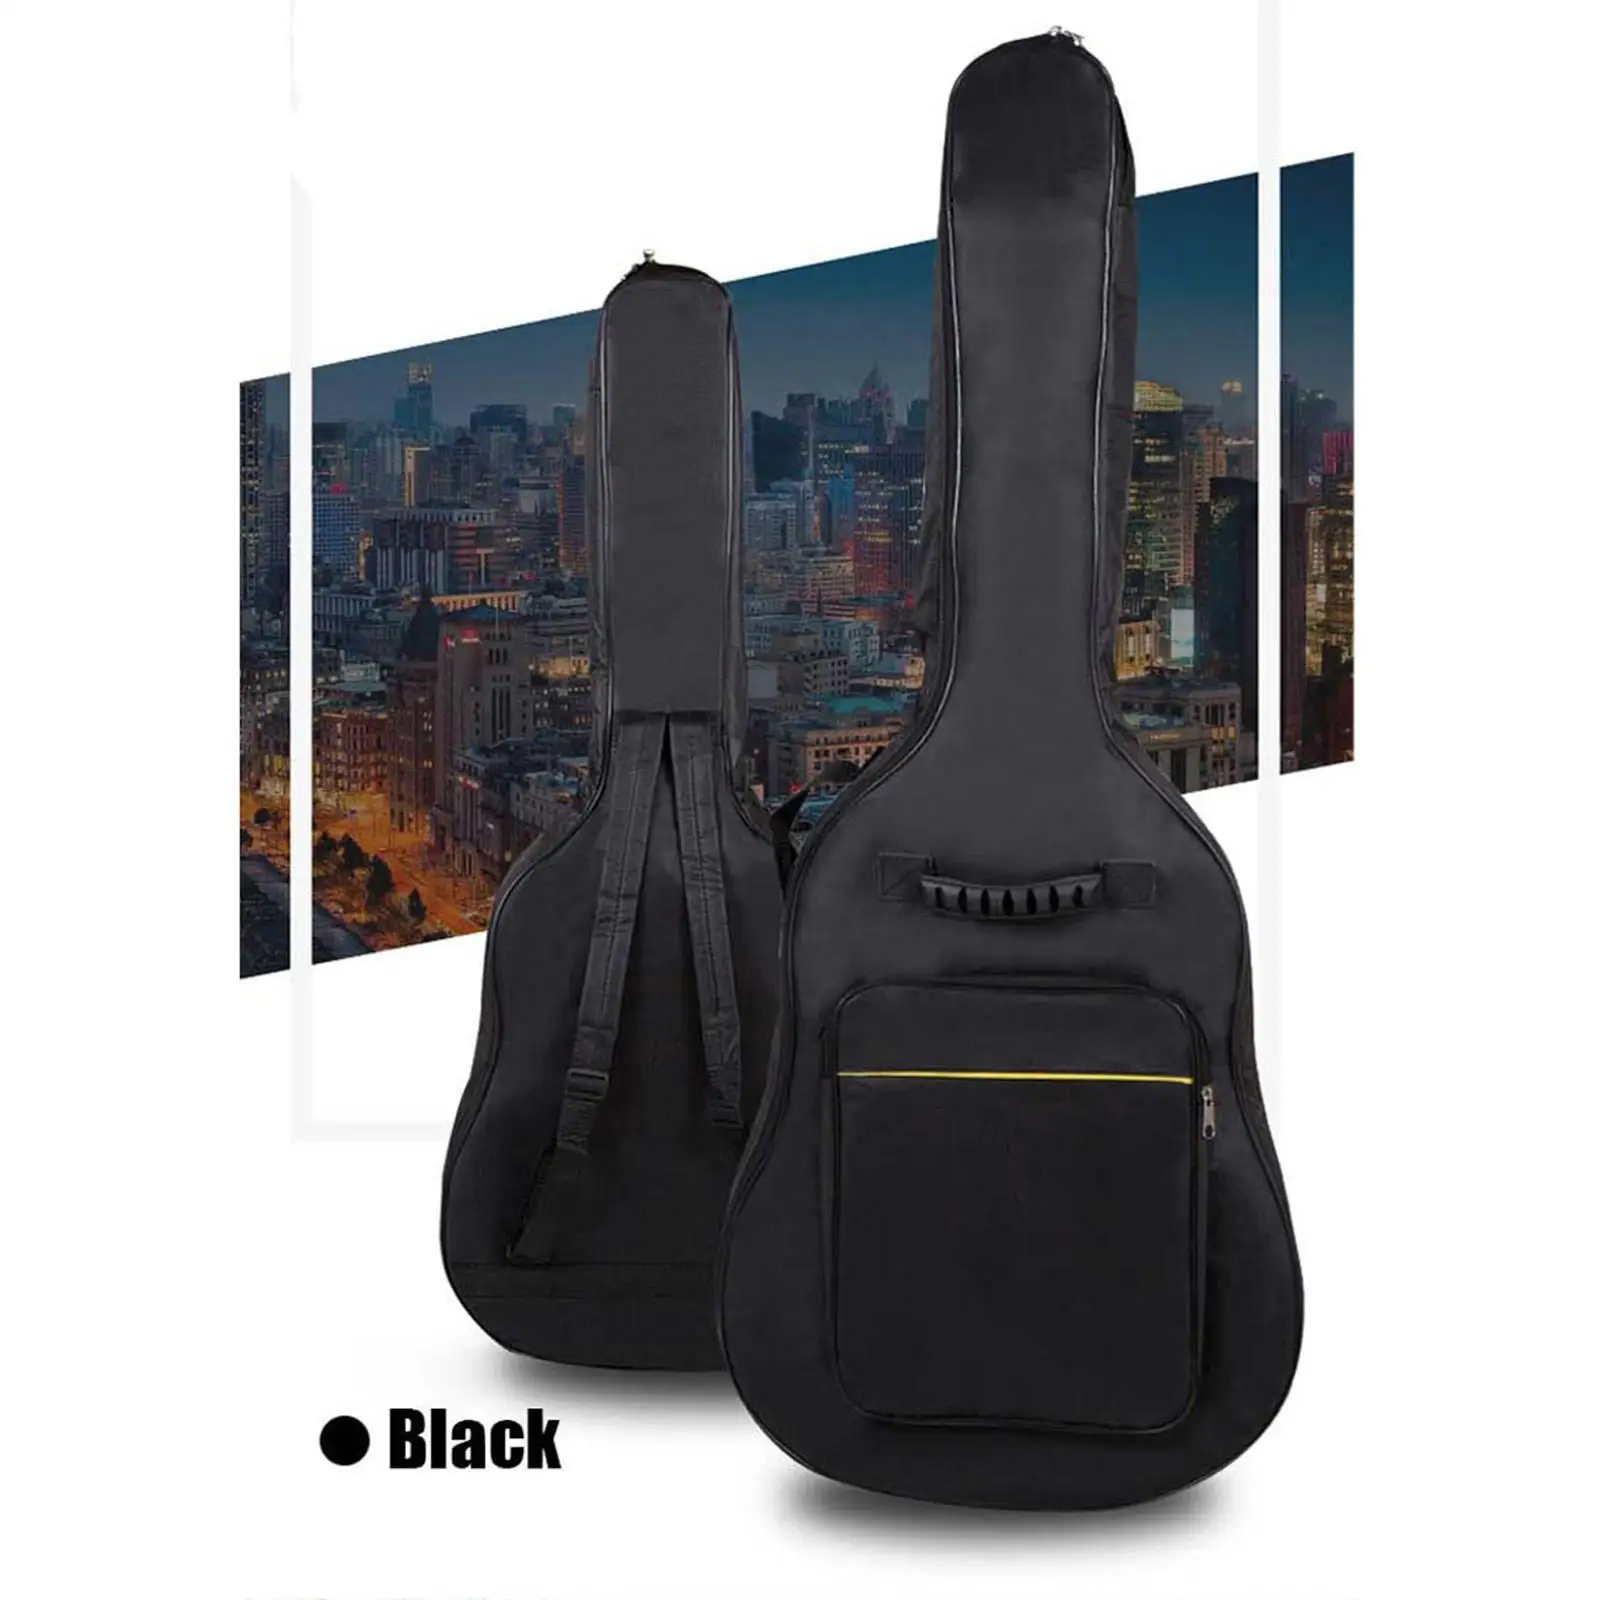 Waterproof 39 `` Inch Guitar Carrying Gig Case Padded Shoulder